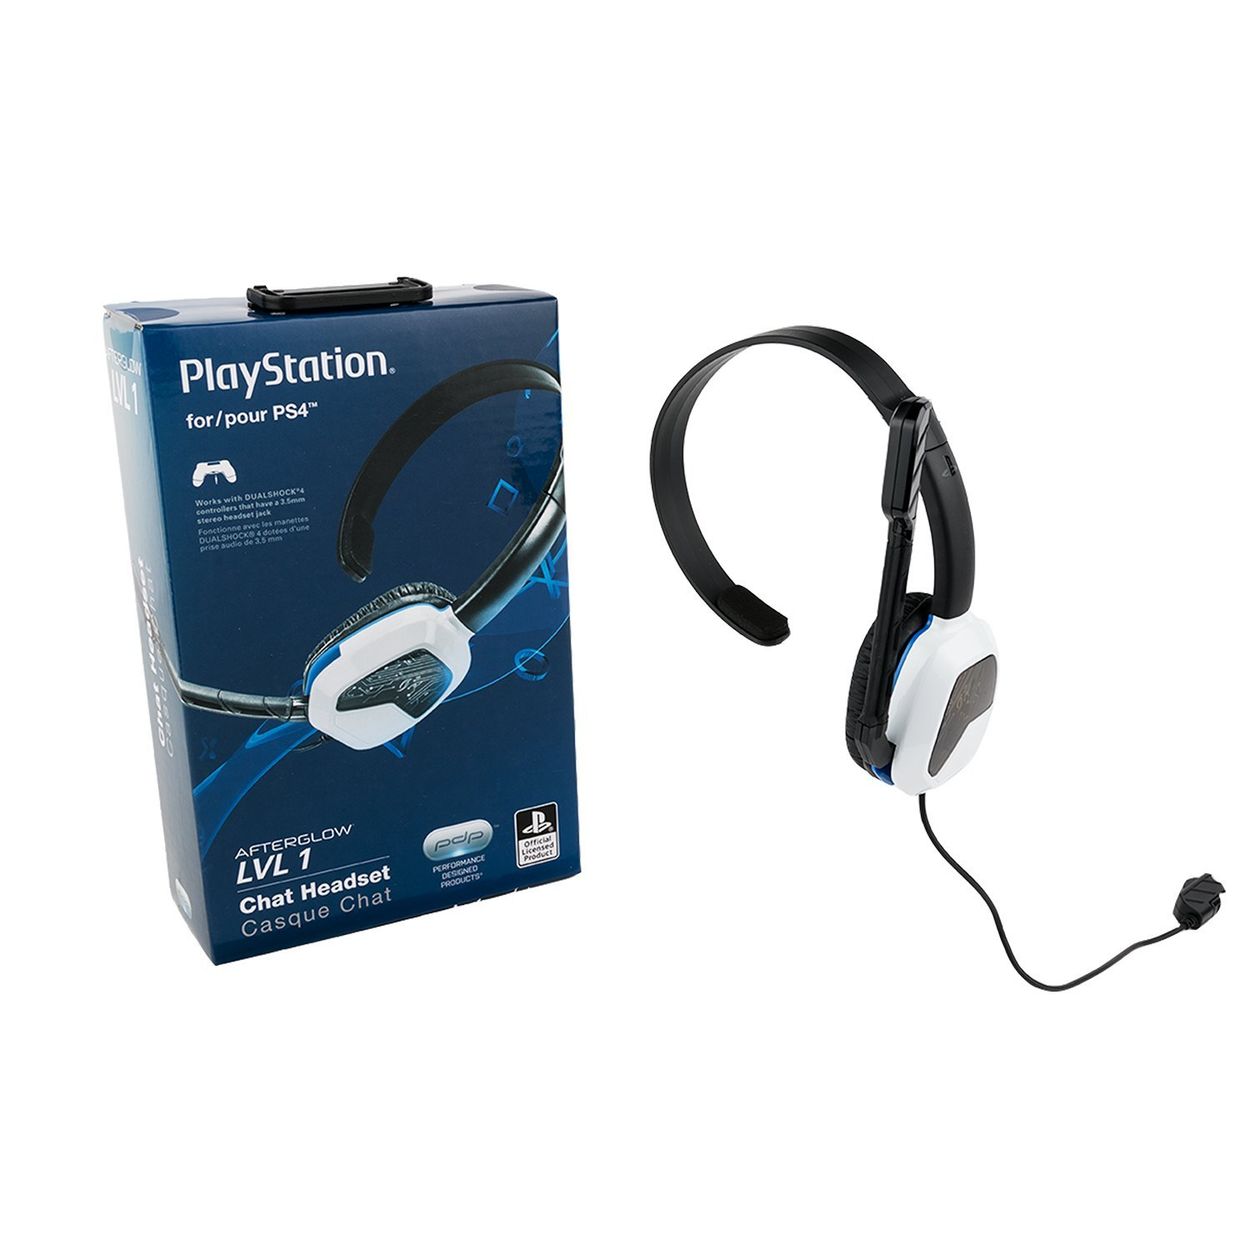 Open Box, Unused PDP Sony Afterglow LVL 1 Chat Headset